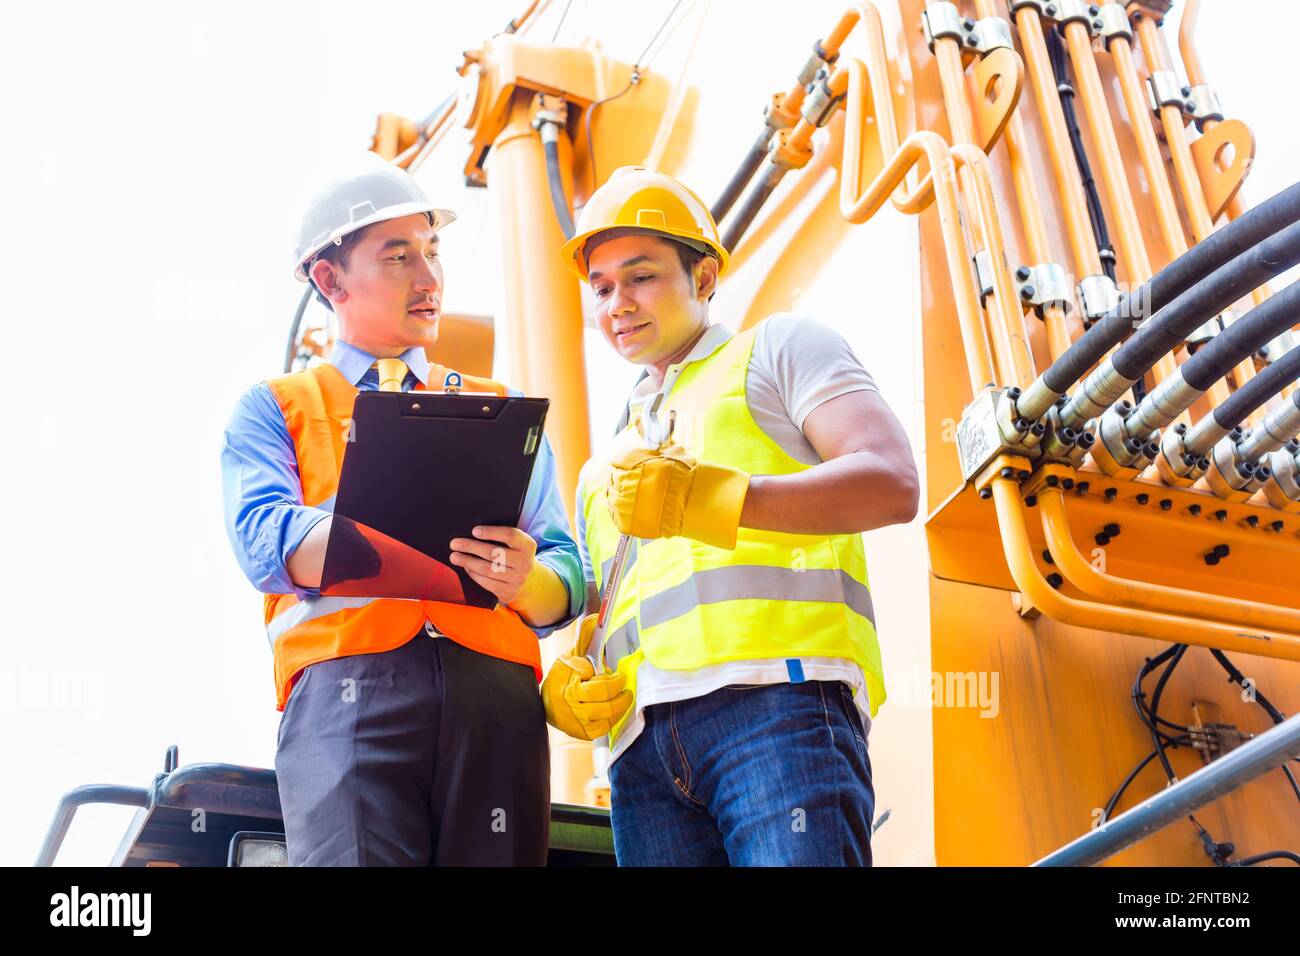 Asian motor mechanic discussing with foreman task list in vehicle workshop Stock Photo